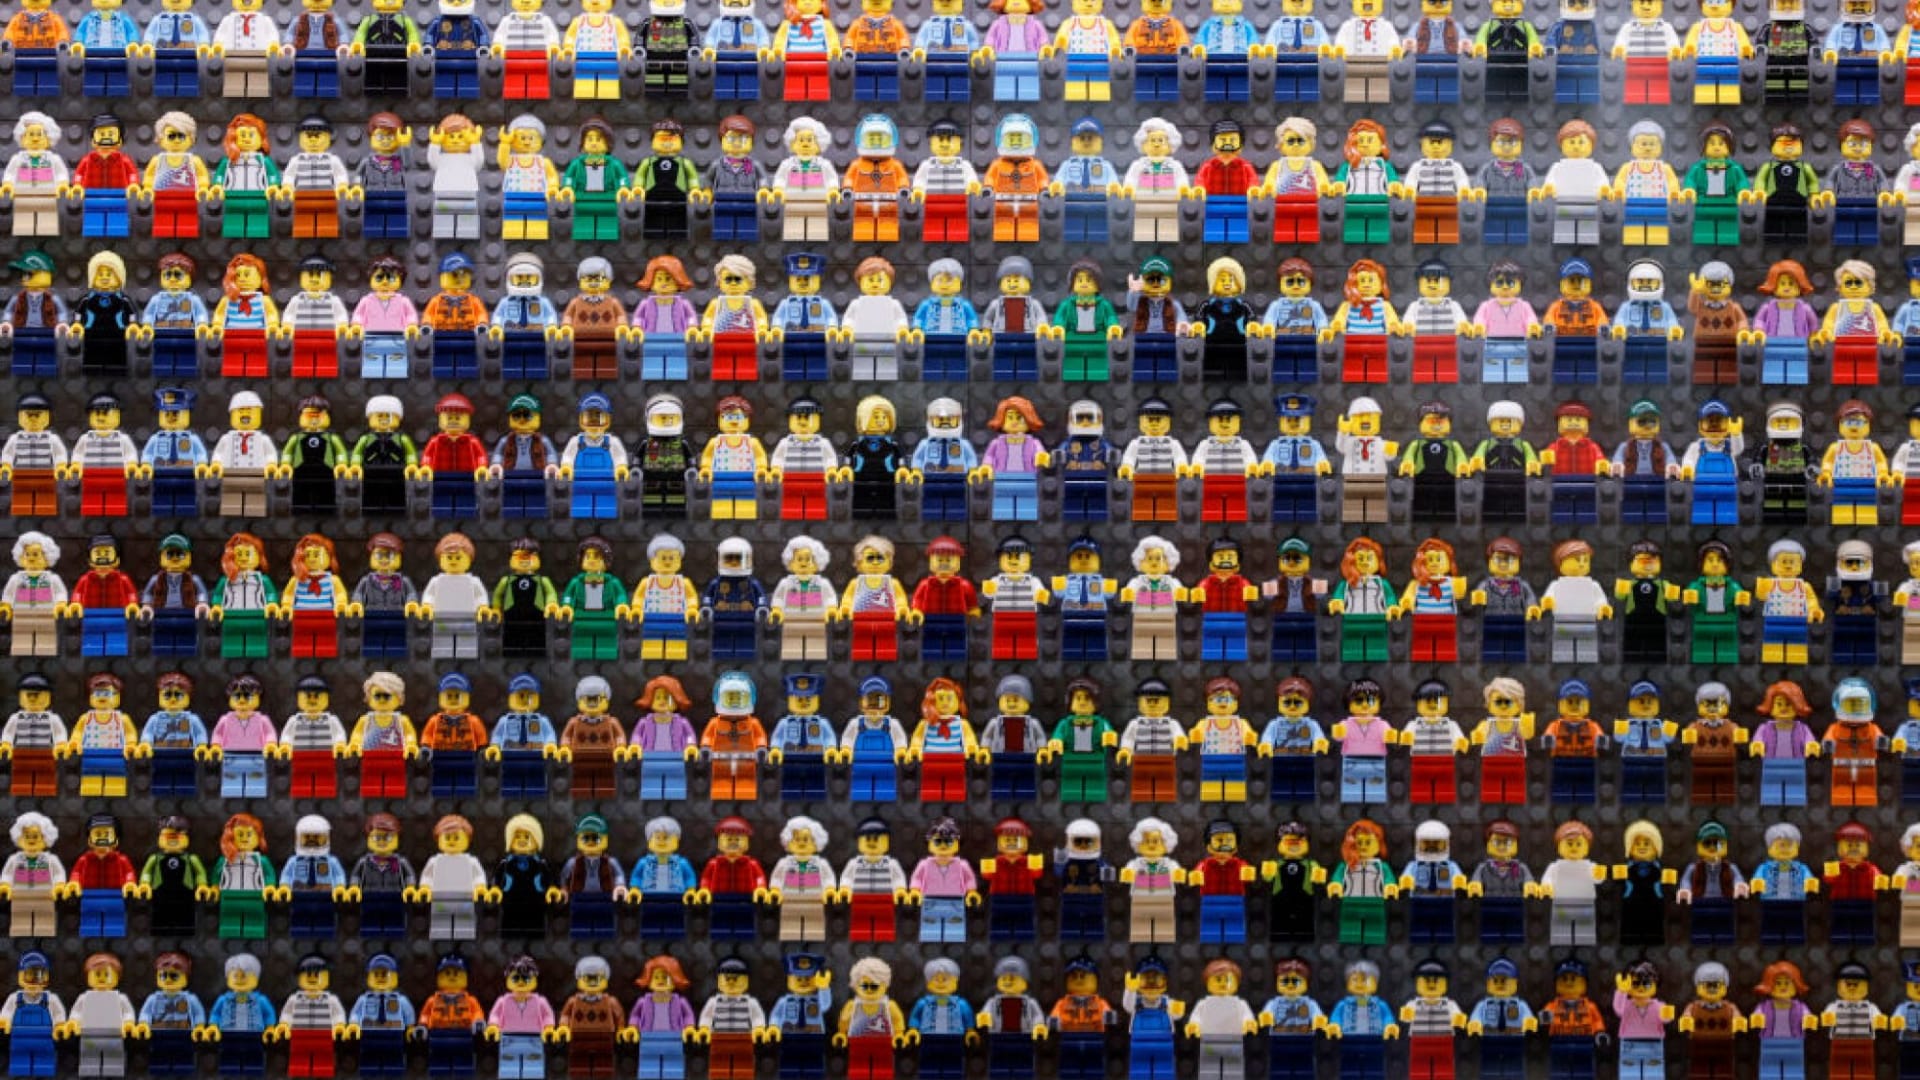 With Just 2 Words, Lego Reminded Everyone Why It's Their Favorite Toy Company